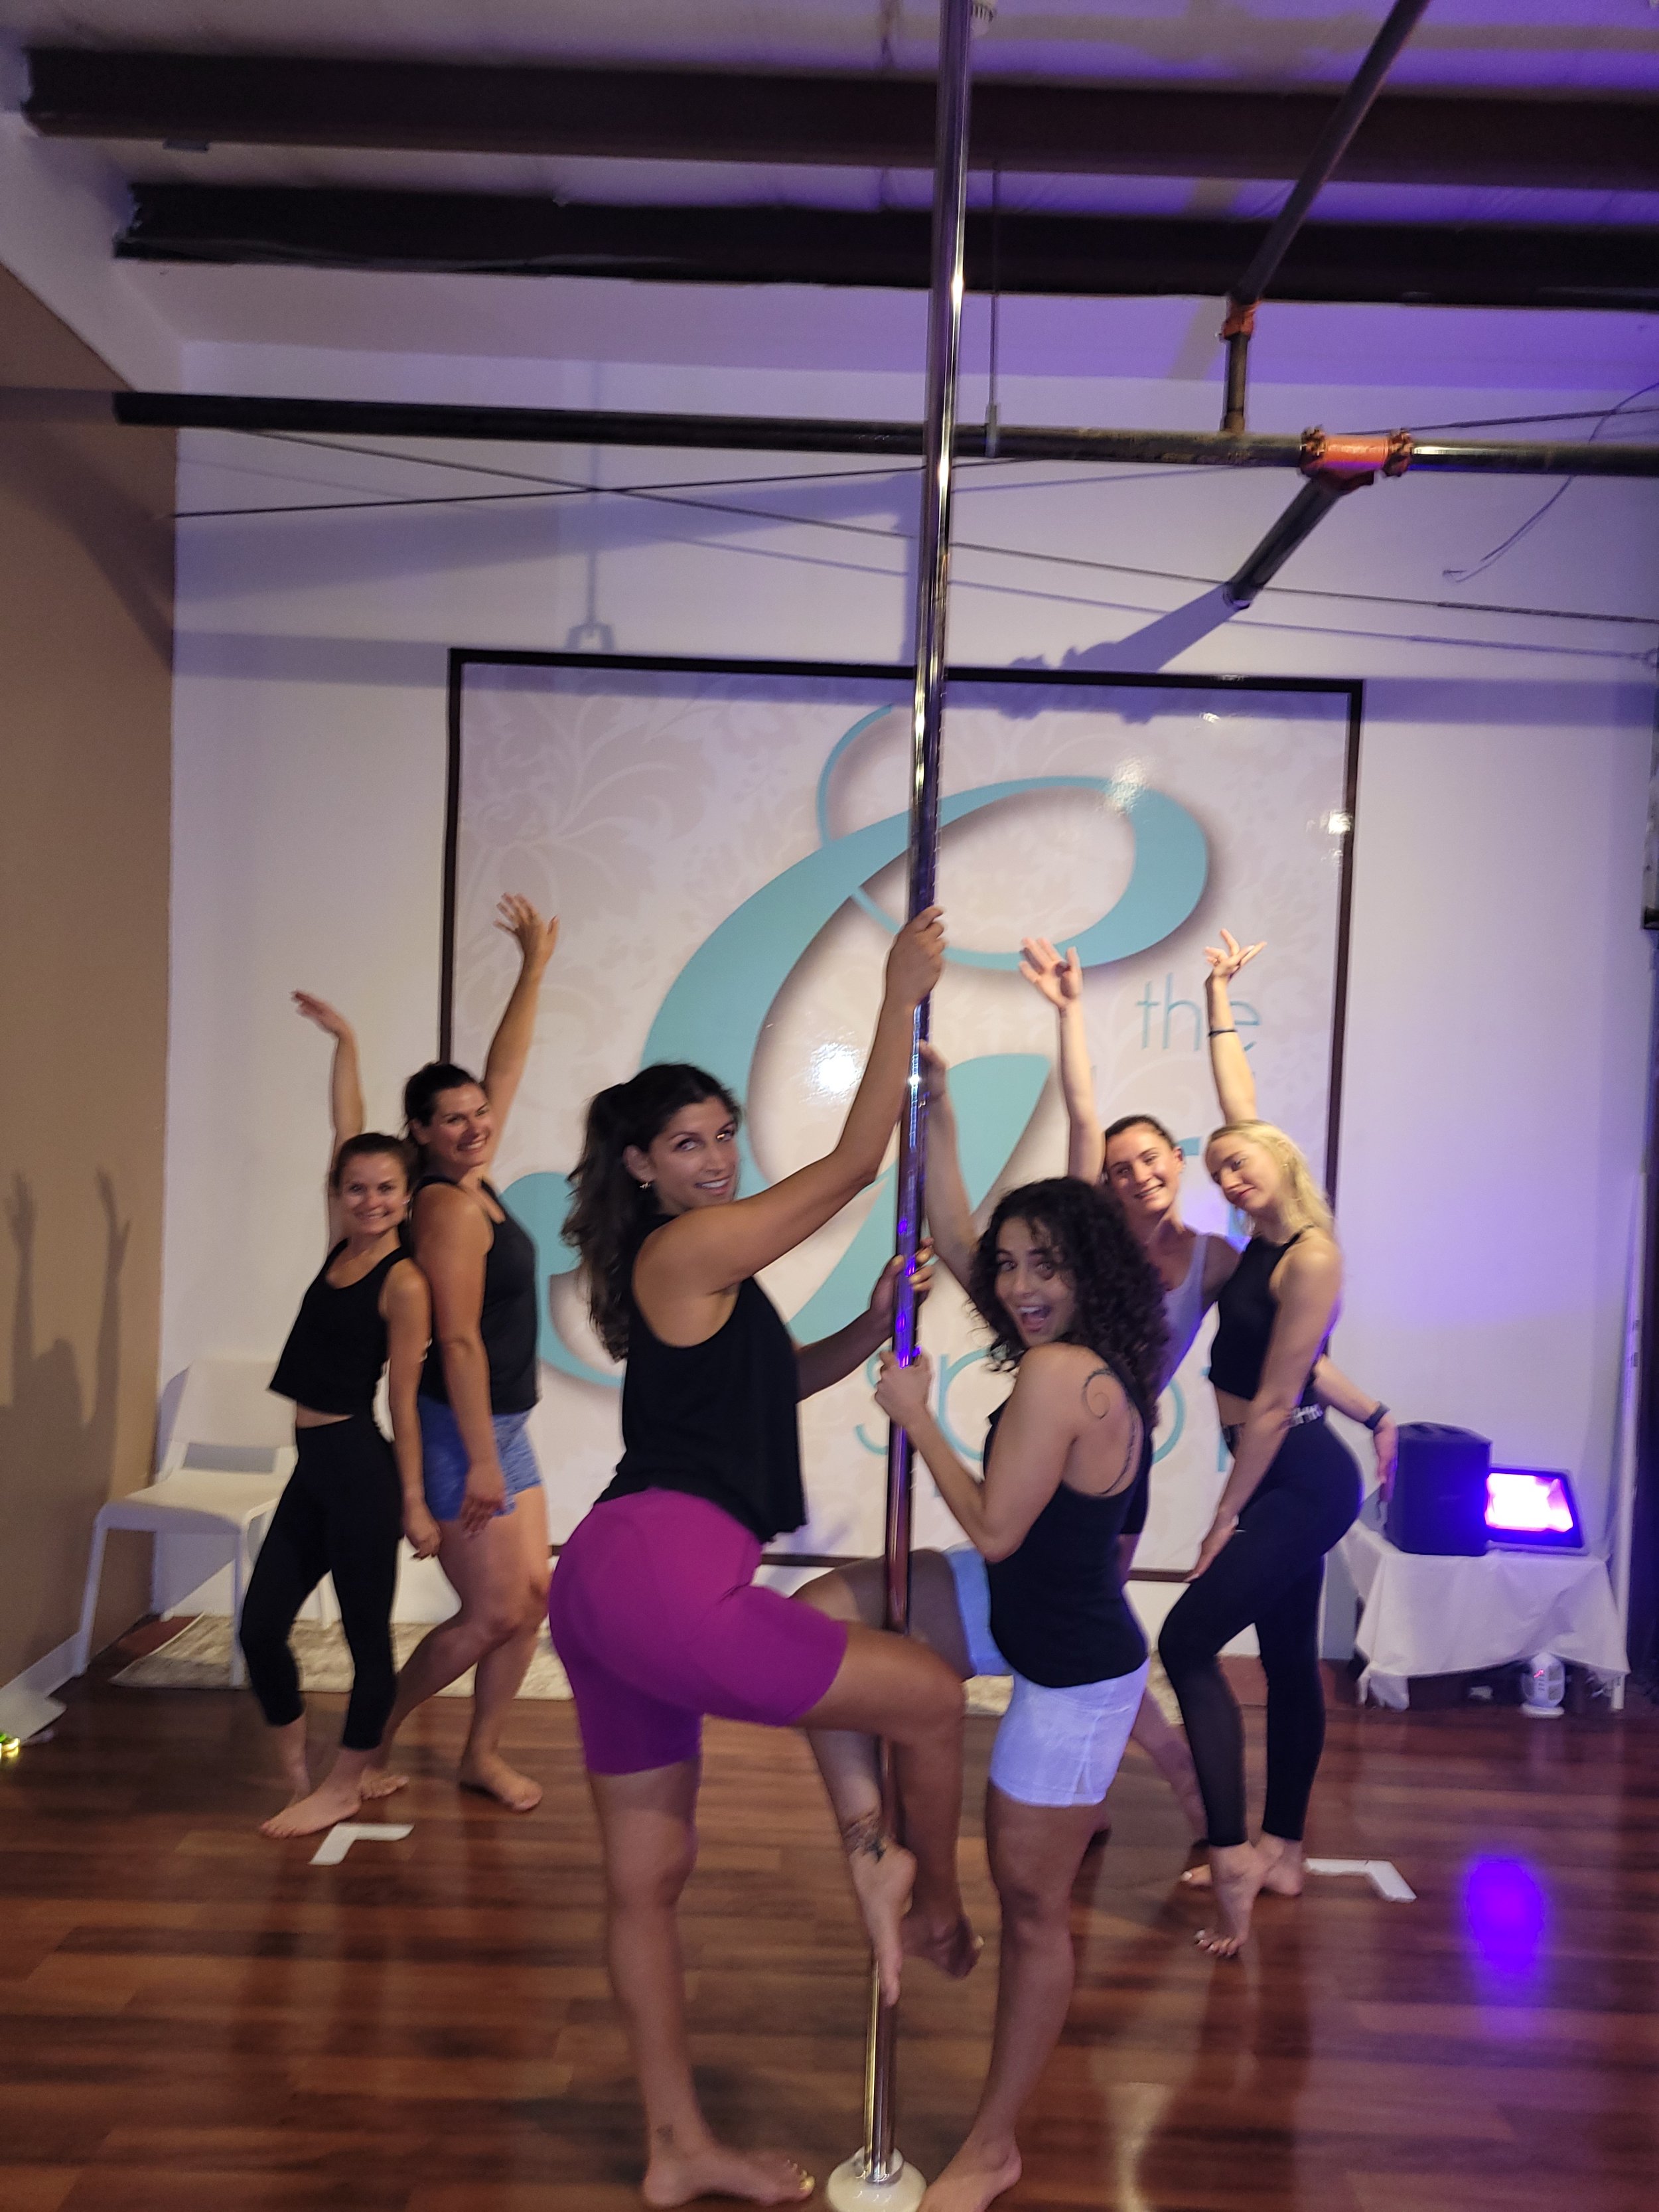 Elysium Aerial Fitness promotes body positivity, mental health through pole  dancing classes - The Daily Gamecock at University of South Carolina